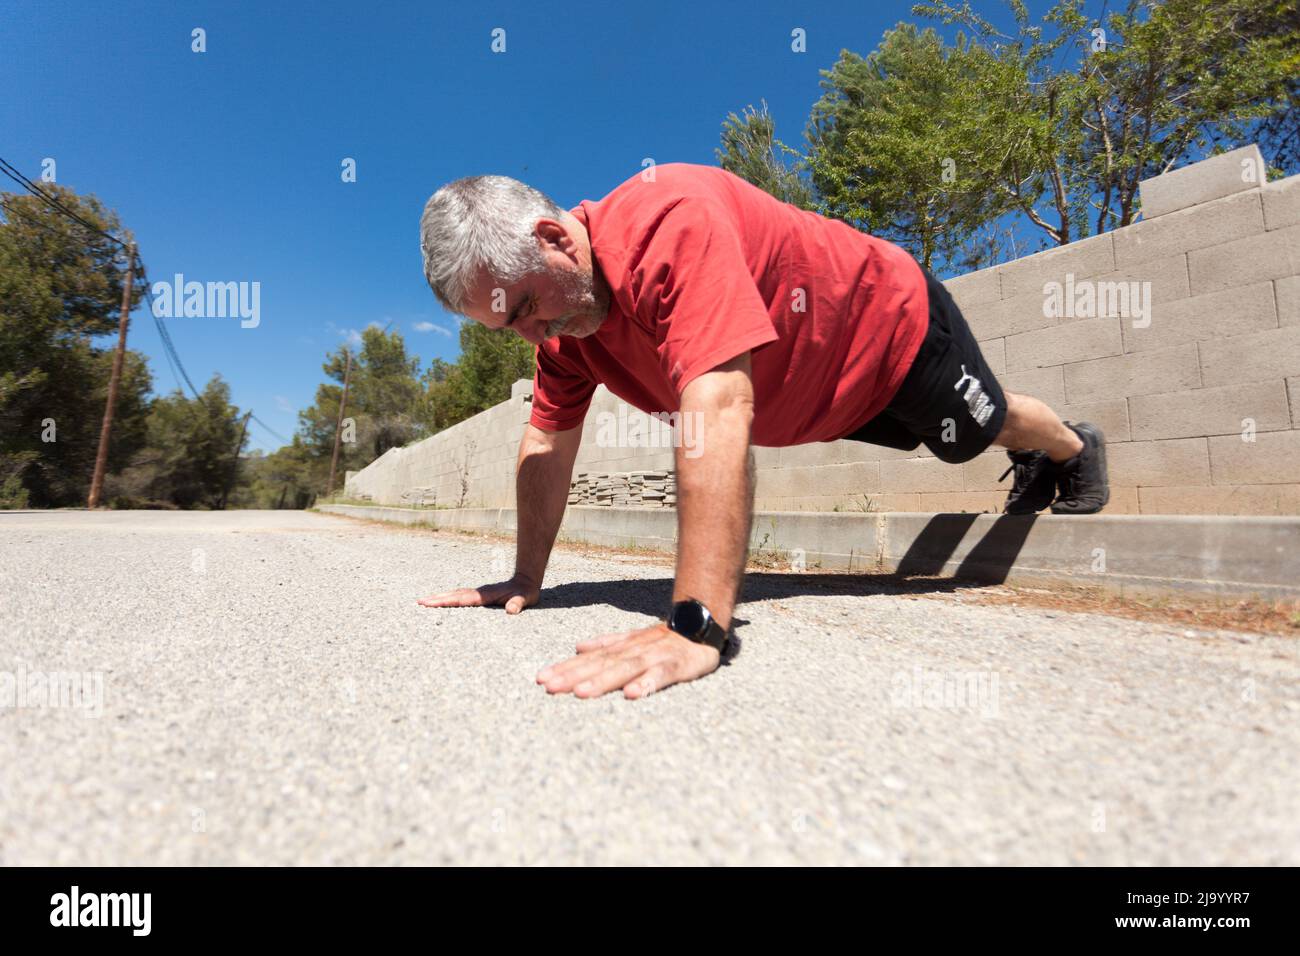 Older man with gray hair doing sports in a rural environment, sport improves our health at any age. Stock Photo